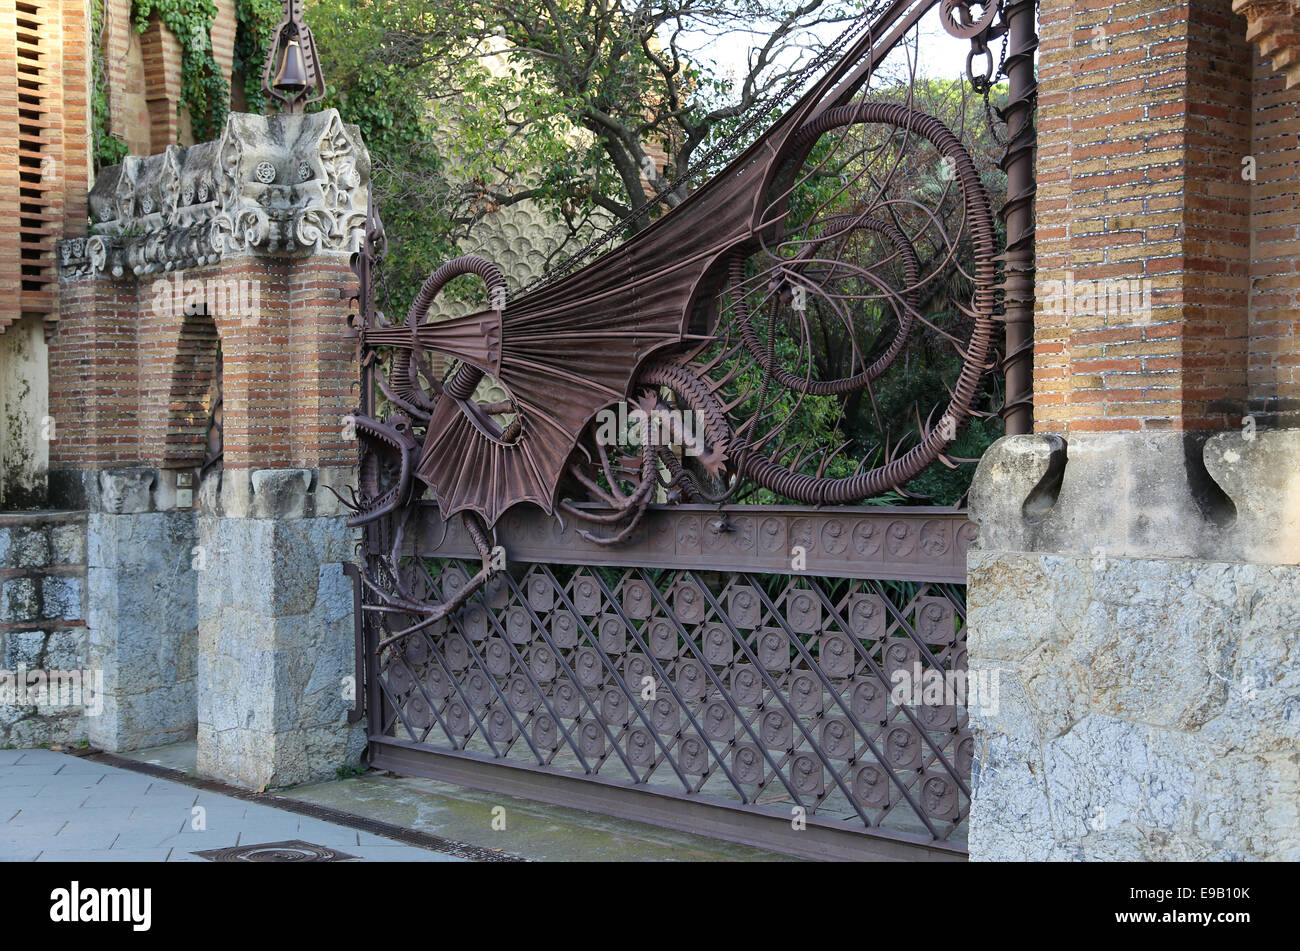 Modernist. Spain. Barcelona. Guell Pavilions.1884-1887. Built  by Antonio Gaudi (1852-1926). The Iron dragon gate. Stock Photo